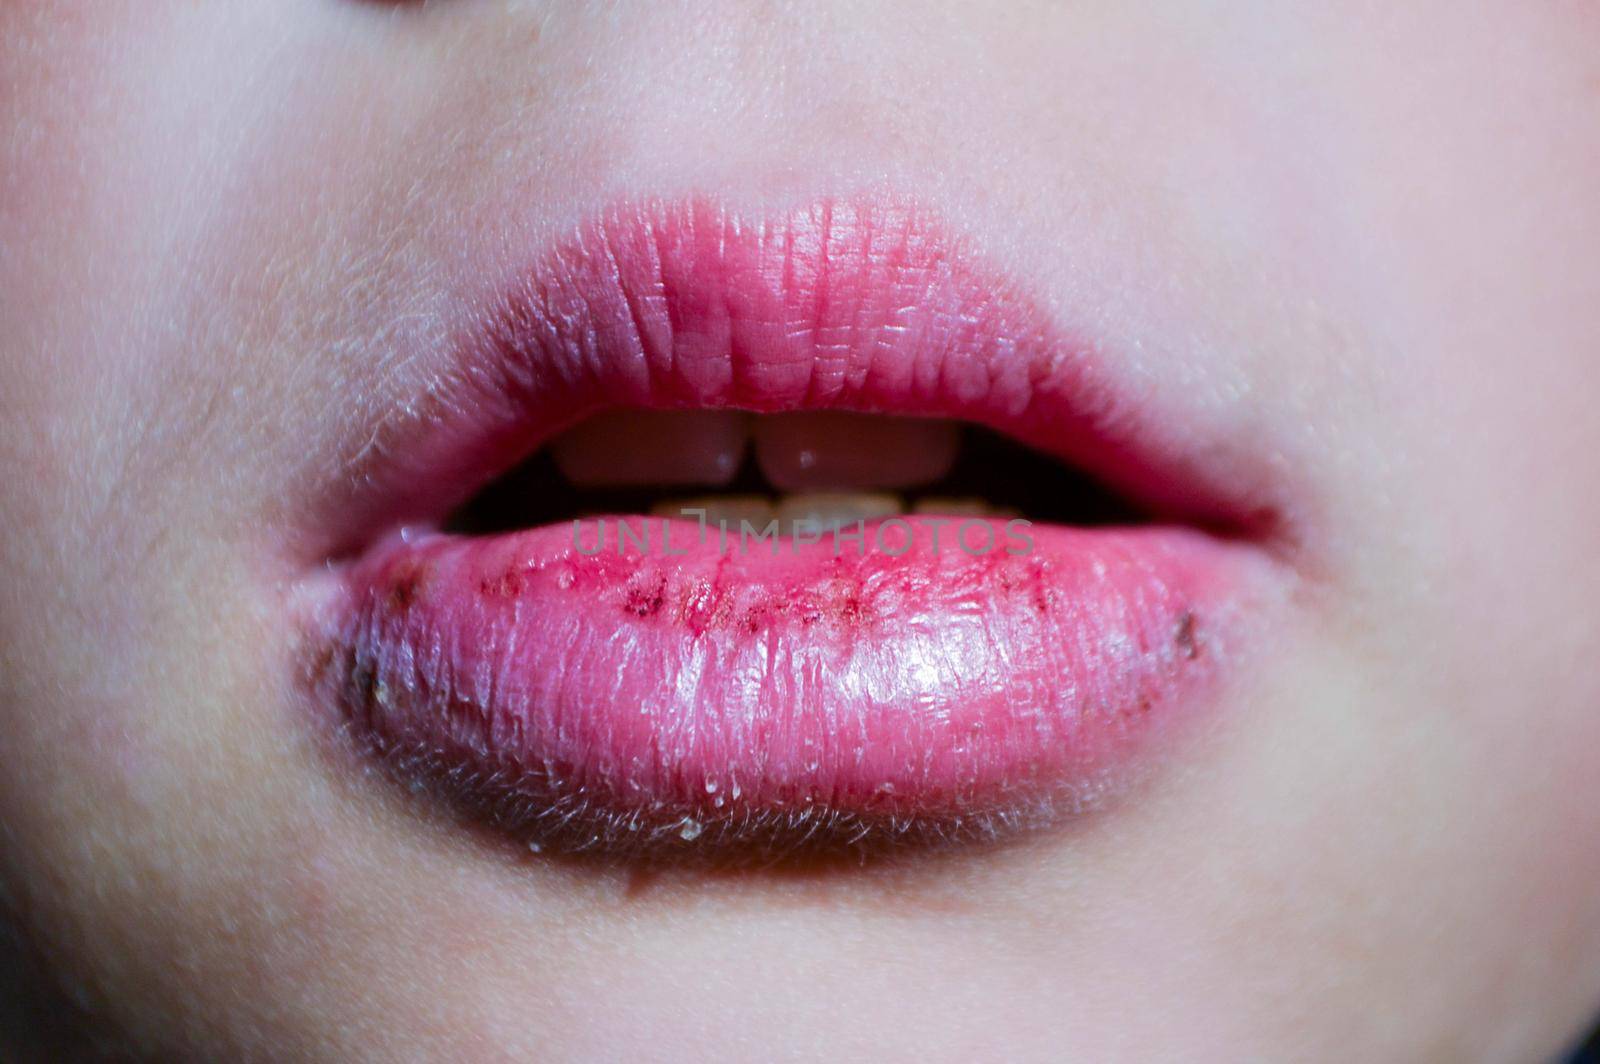 Cracked lips caused wound on the corner of the lips: dry skin problem with mouth disease, Angular cheilitis close up of chapped. High quality photo